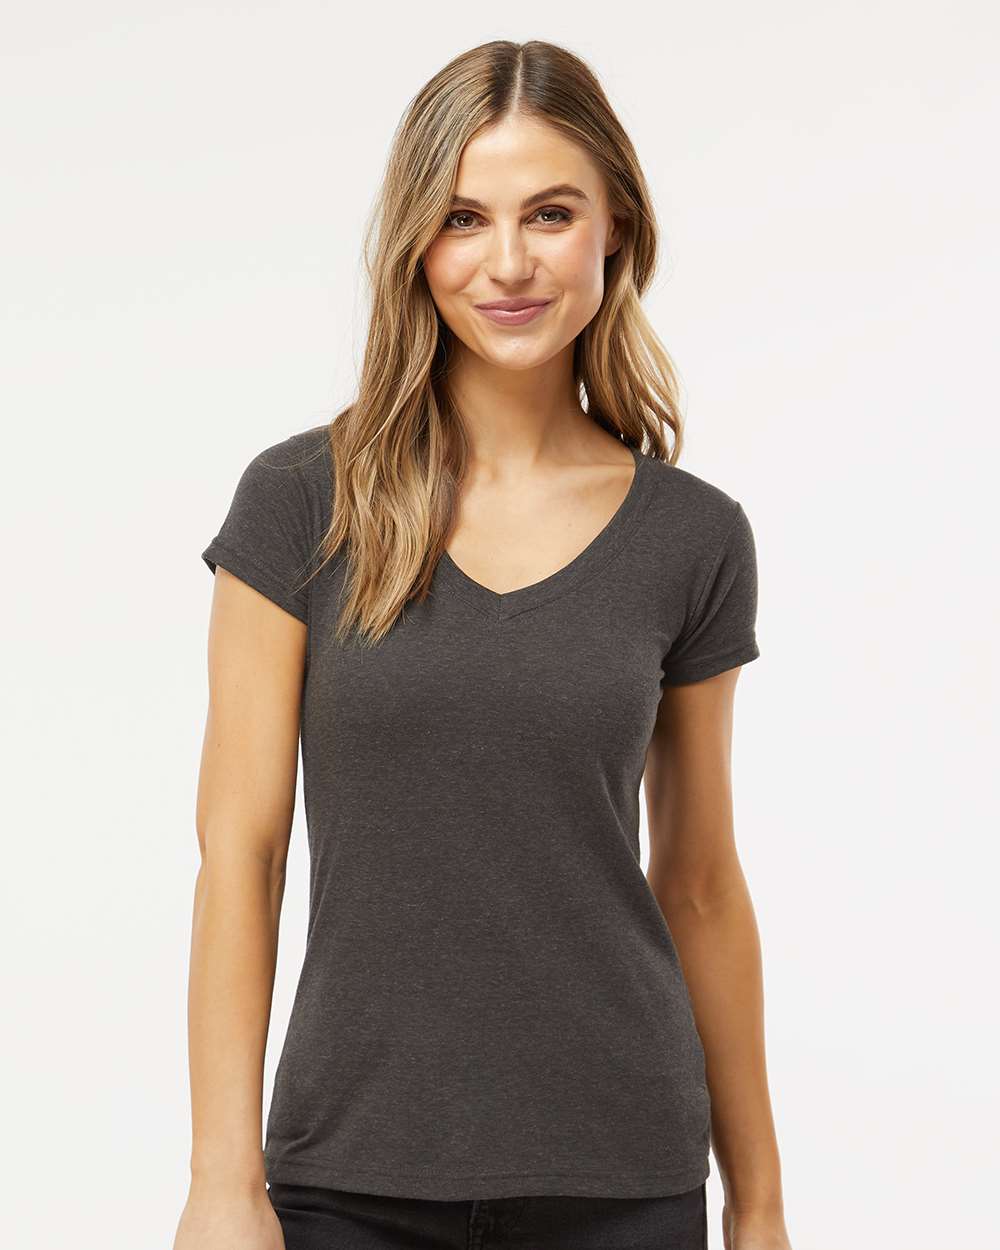 M&O Women's Deluxe Blend V-Neck T-Shirt 3542 #colormdl_Heather Graphite